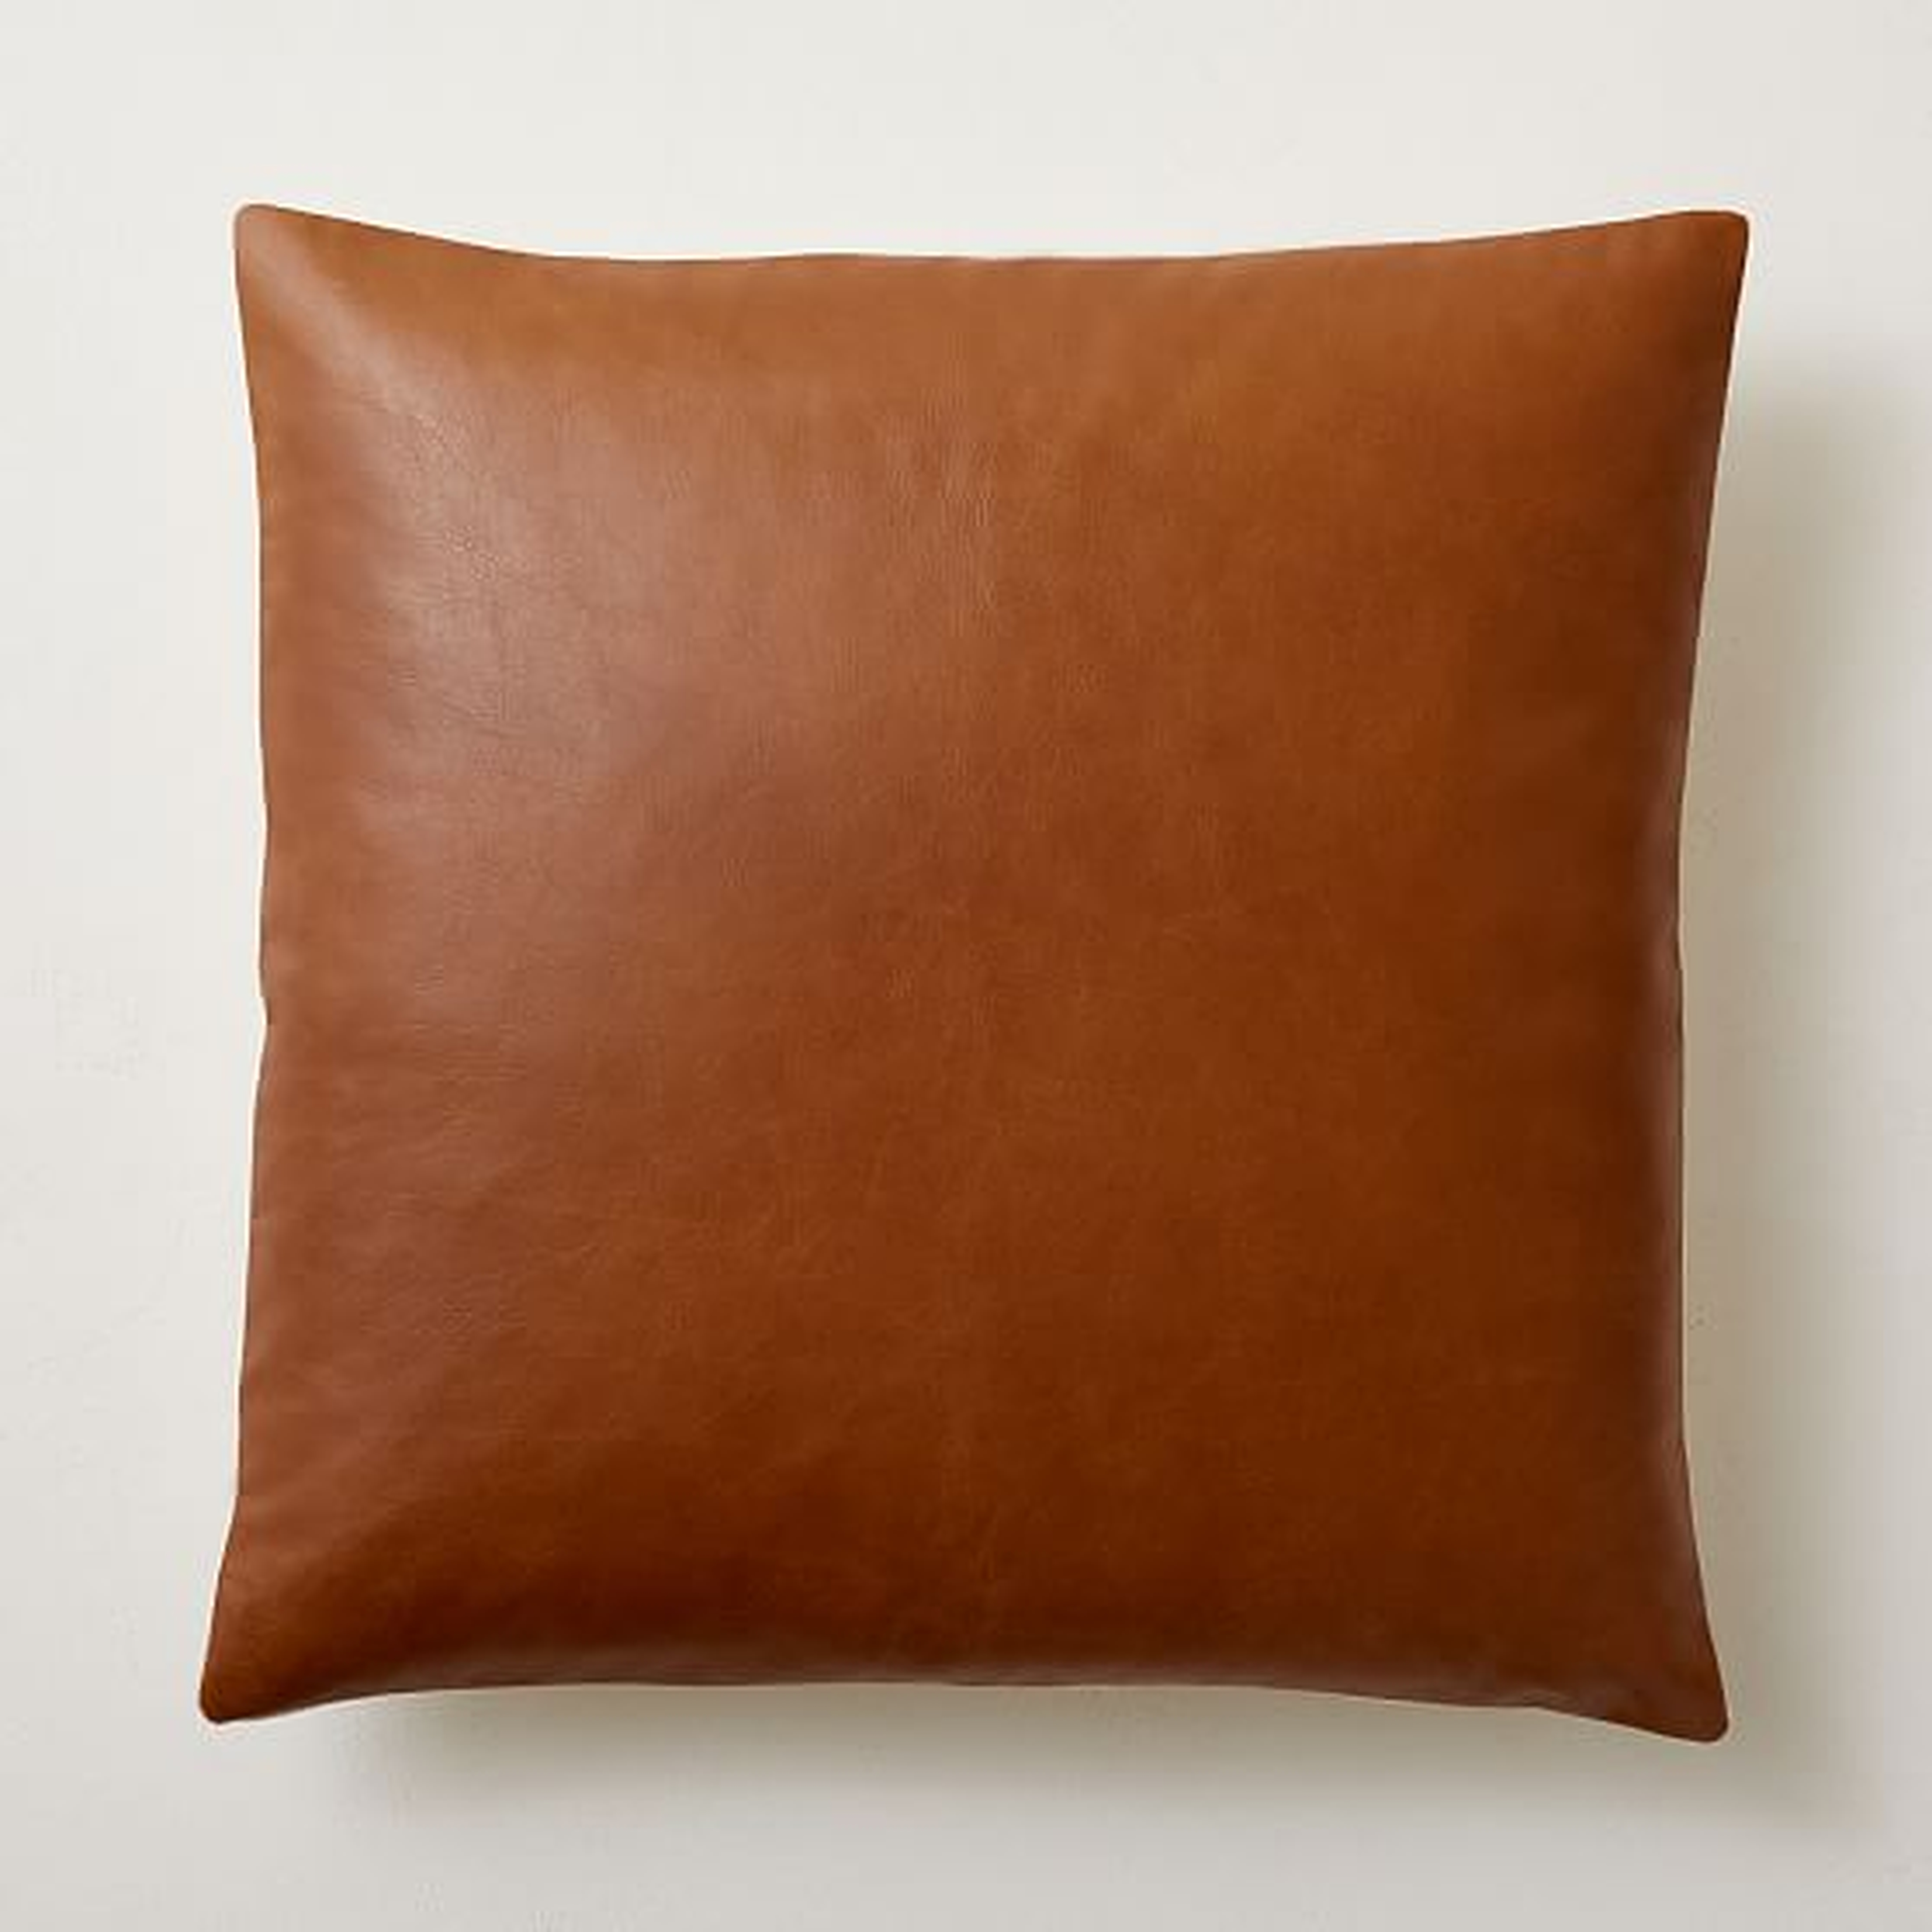 Leather Pillow Cover, 20"x20", Nut - West Elm